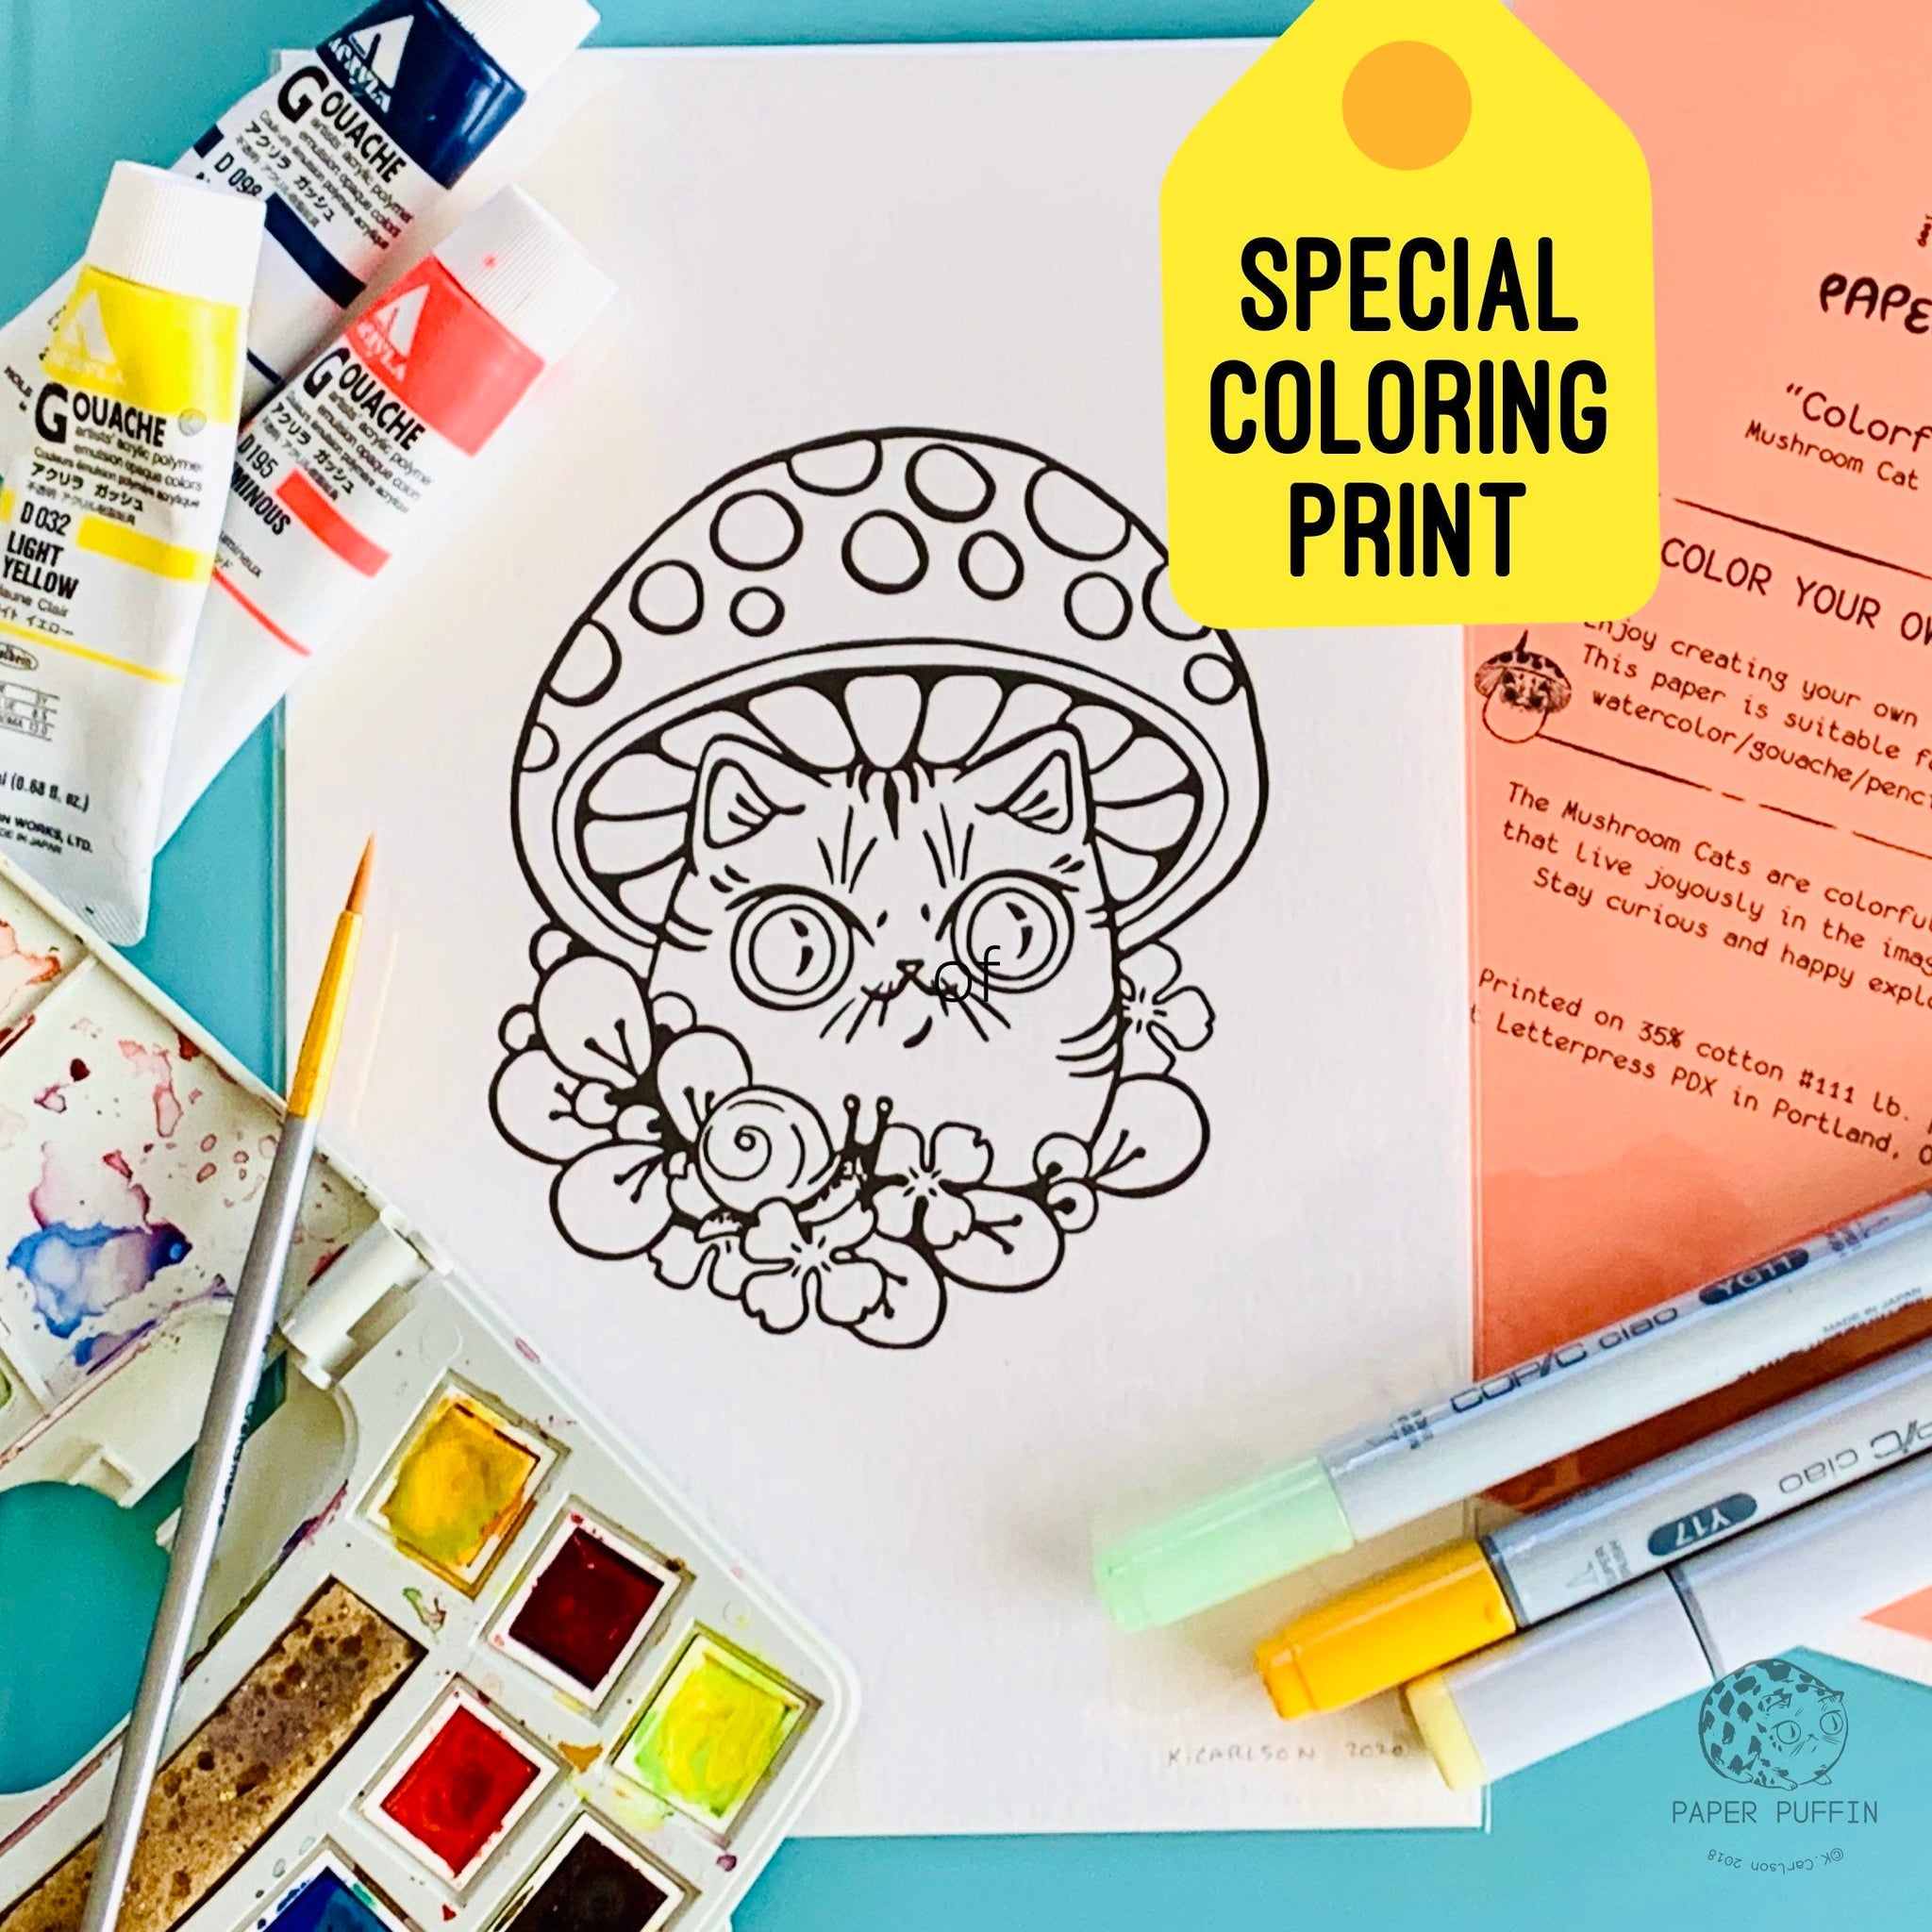 Color Your Own “Colorful Cap" Print 6x9